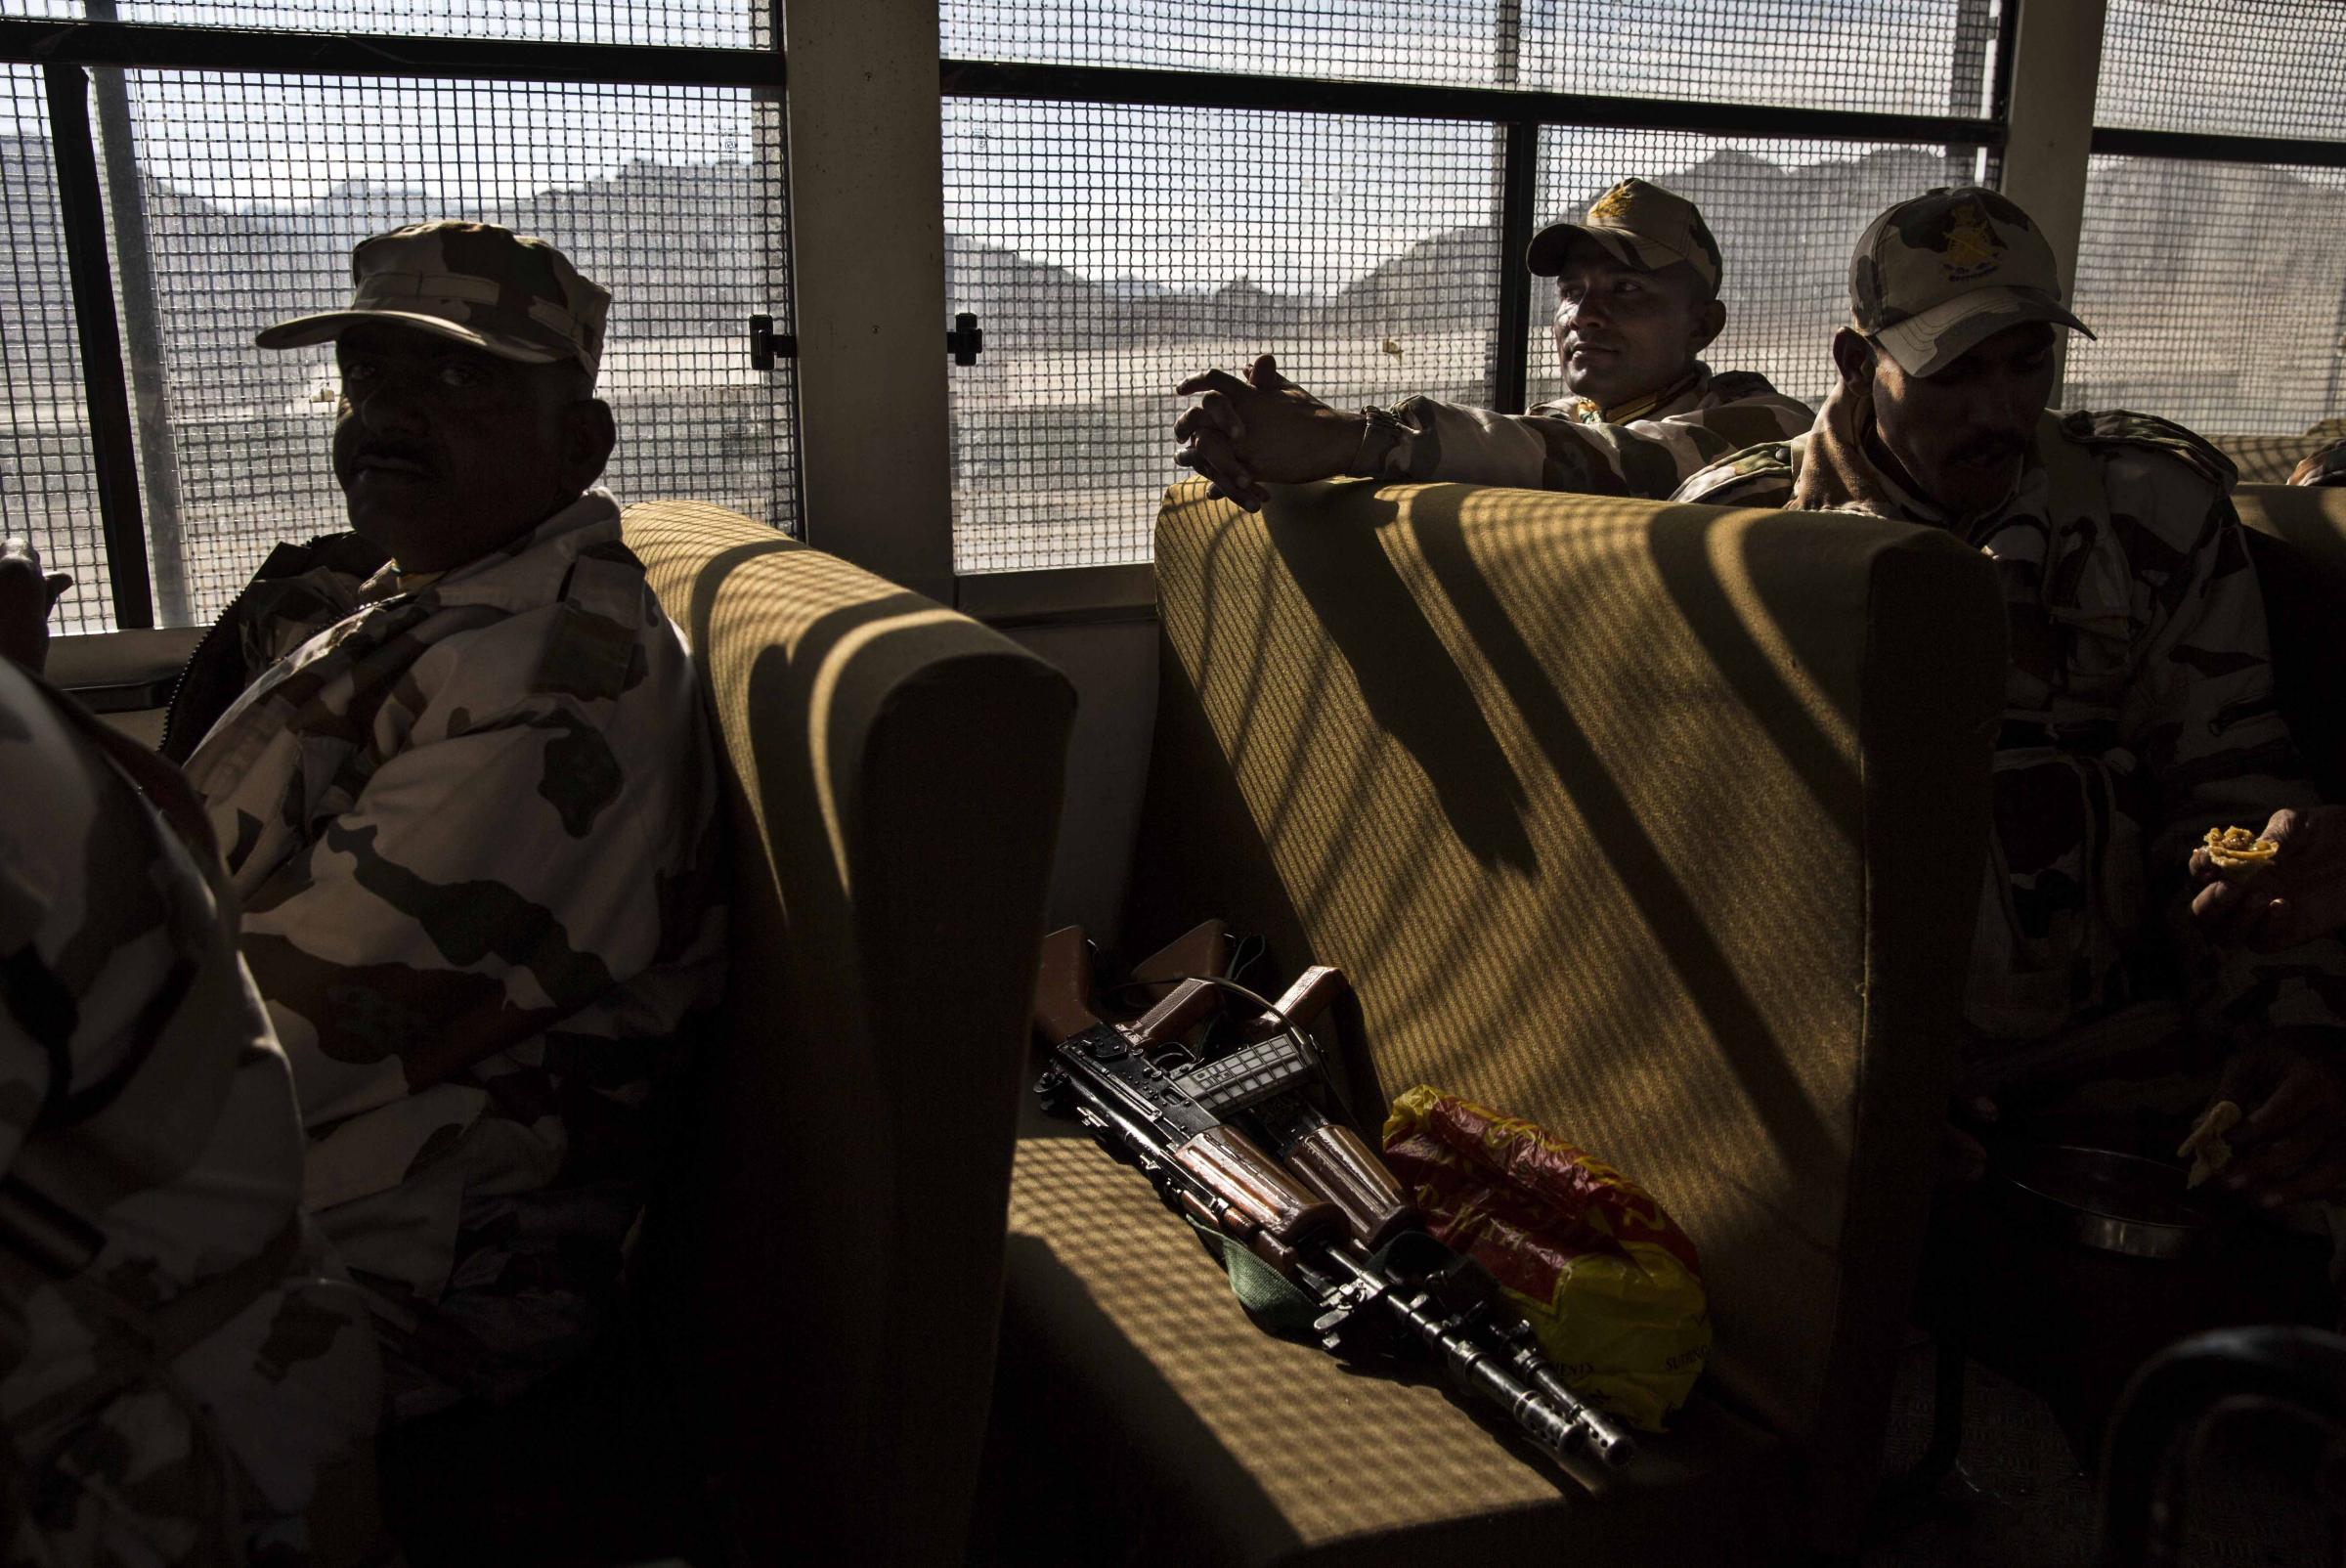 Indian security force soldiers on election duty sit in a bus as they leave a central collection point to head for a polling station, on May 6, 2014 in Leh, Ladakh.